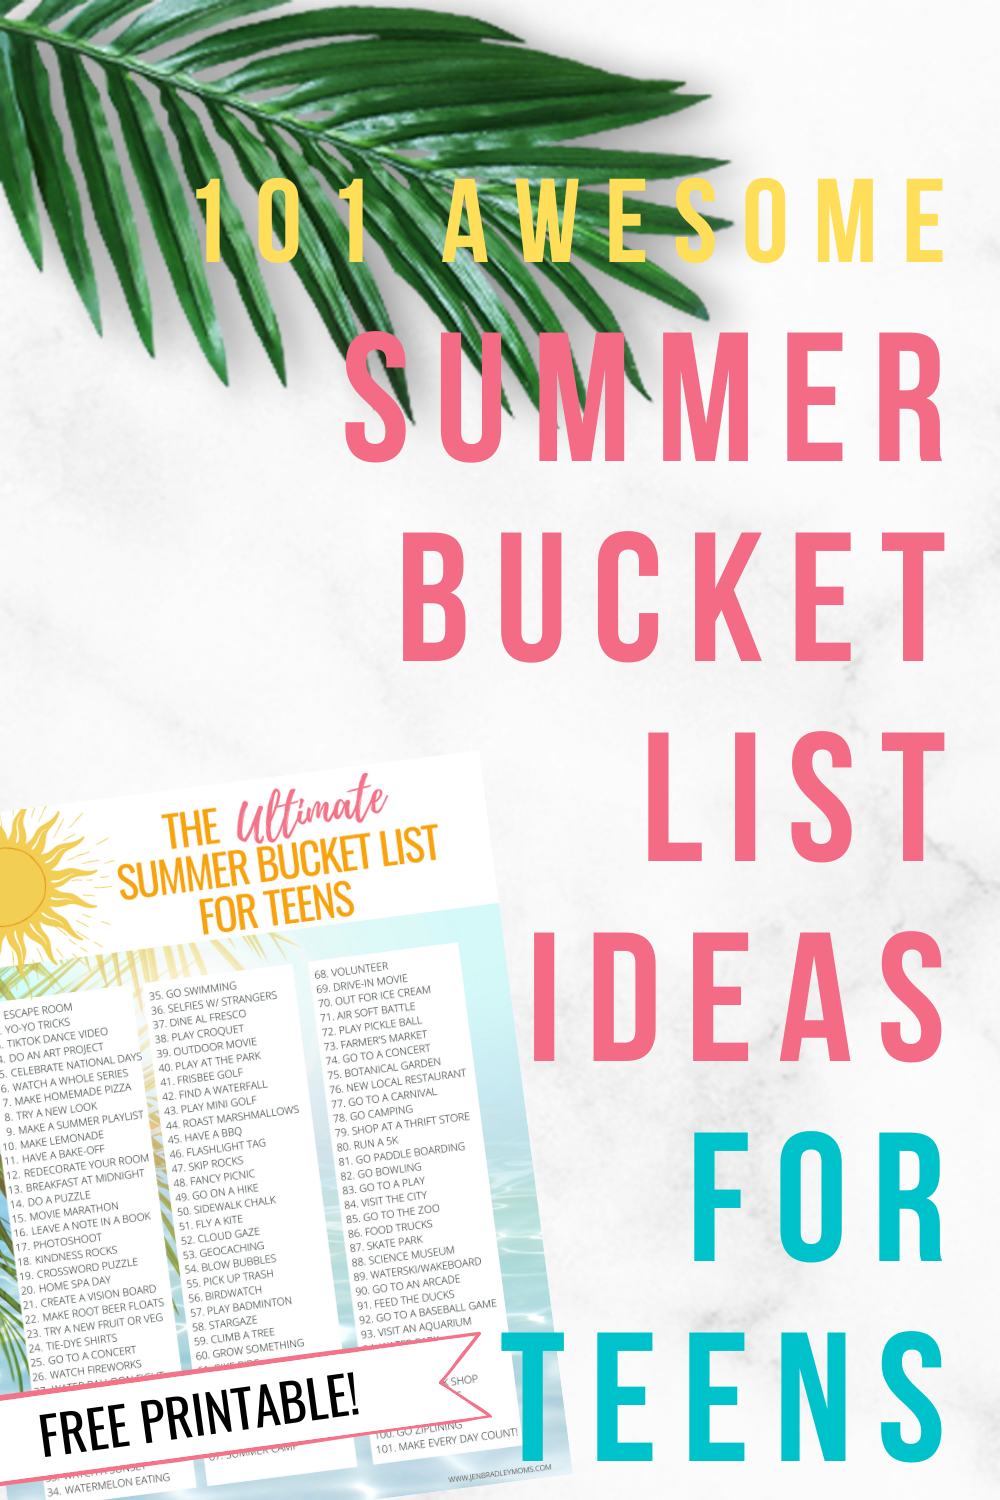 The Ultimate Summer Bucket List for Teens